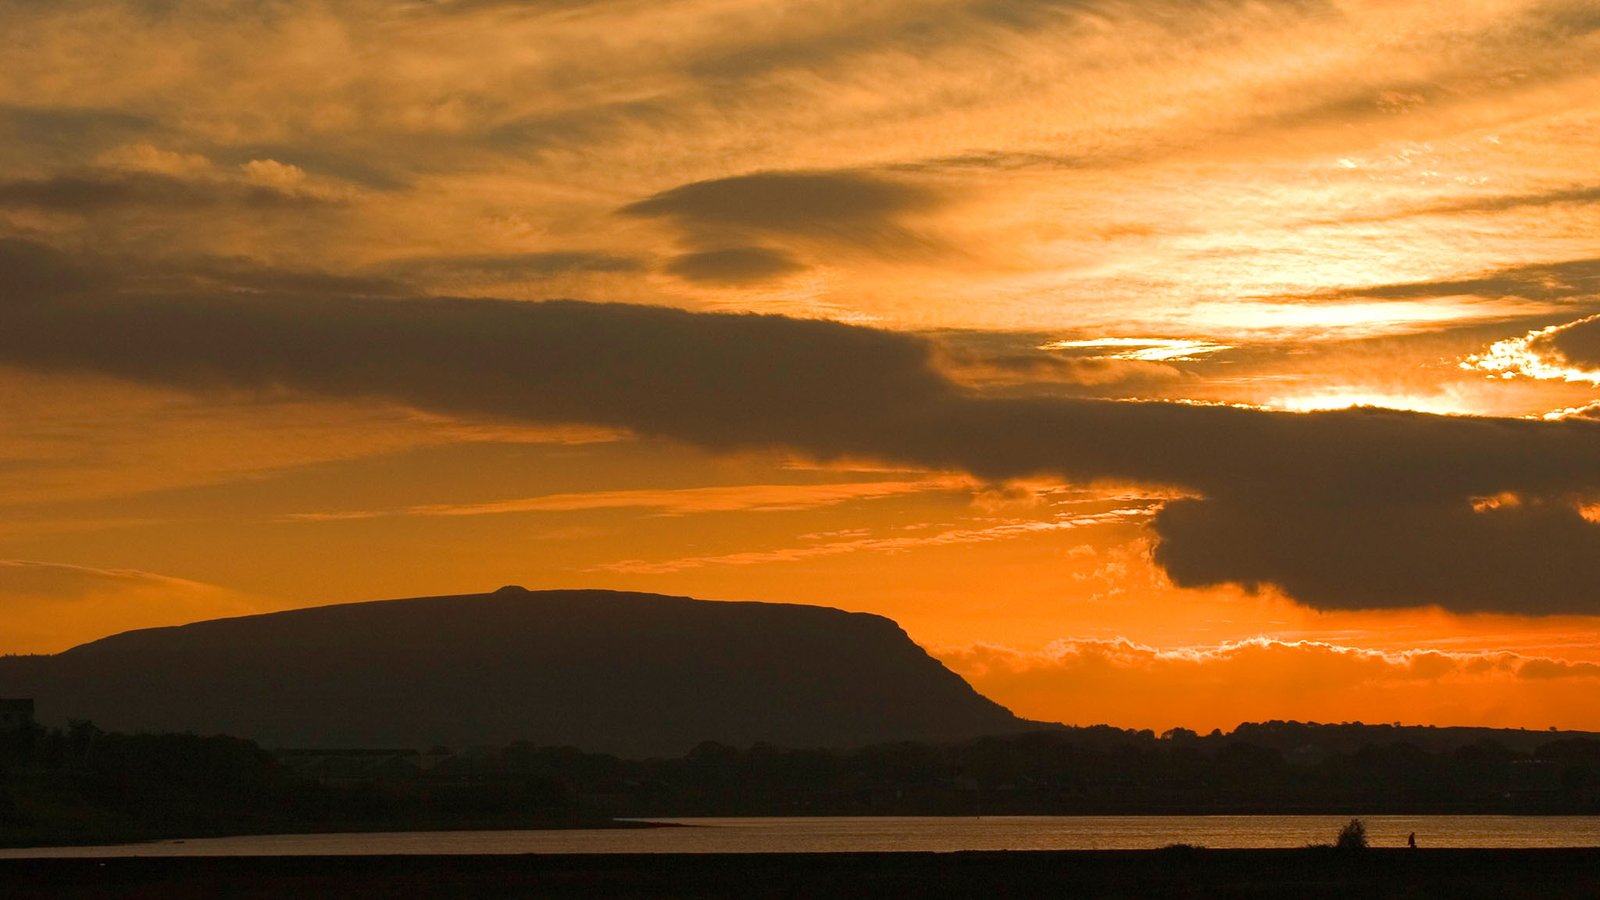 Sunset over Knocknarea Mountain and Sligo Bay, Ireland. The small mound on top of this mountain is the burial mound of Queen Maeve, the famous Queen who instigated the Táin Bó Cuailgne (Cattle Raid of Cooley). She is buried under a cairn of 40,000 tons of rock, which is 6000 years old. Legend says she is buried standing upright, spear in hand and facing Ulster, her enemy.